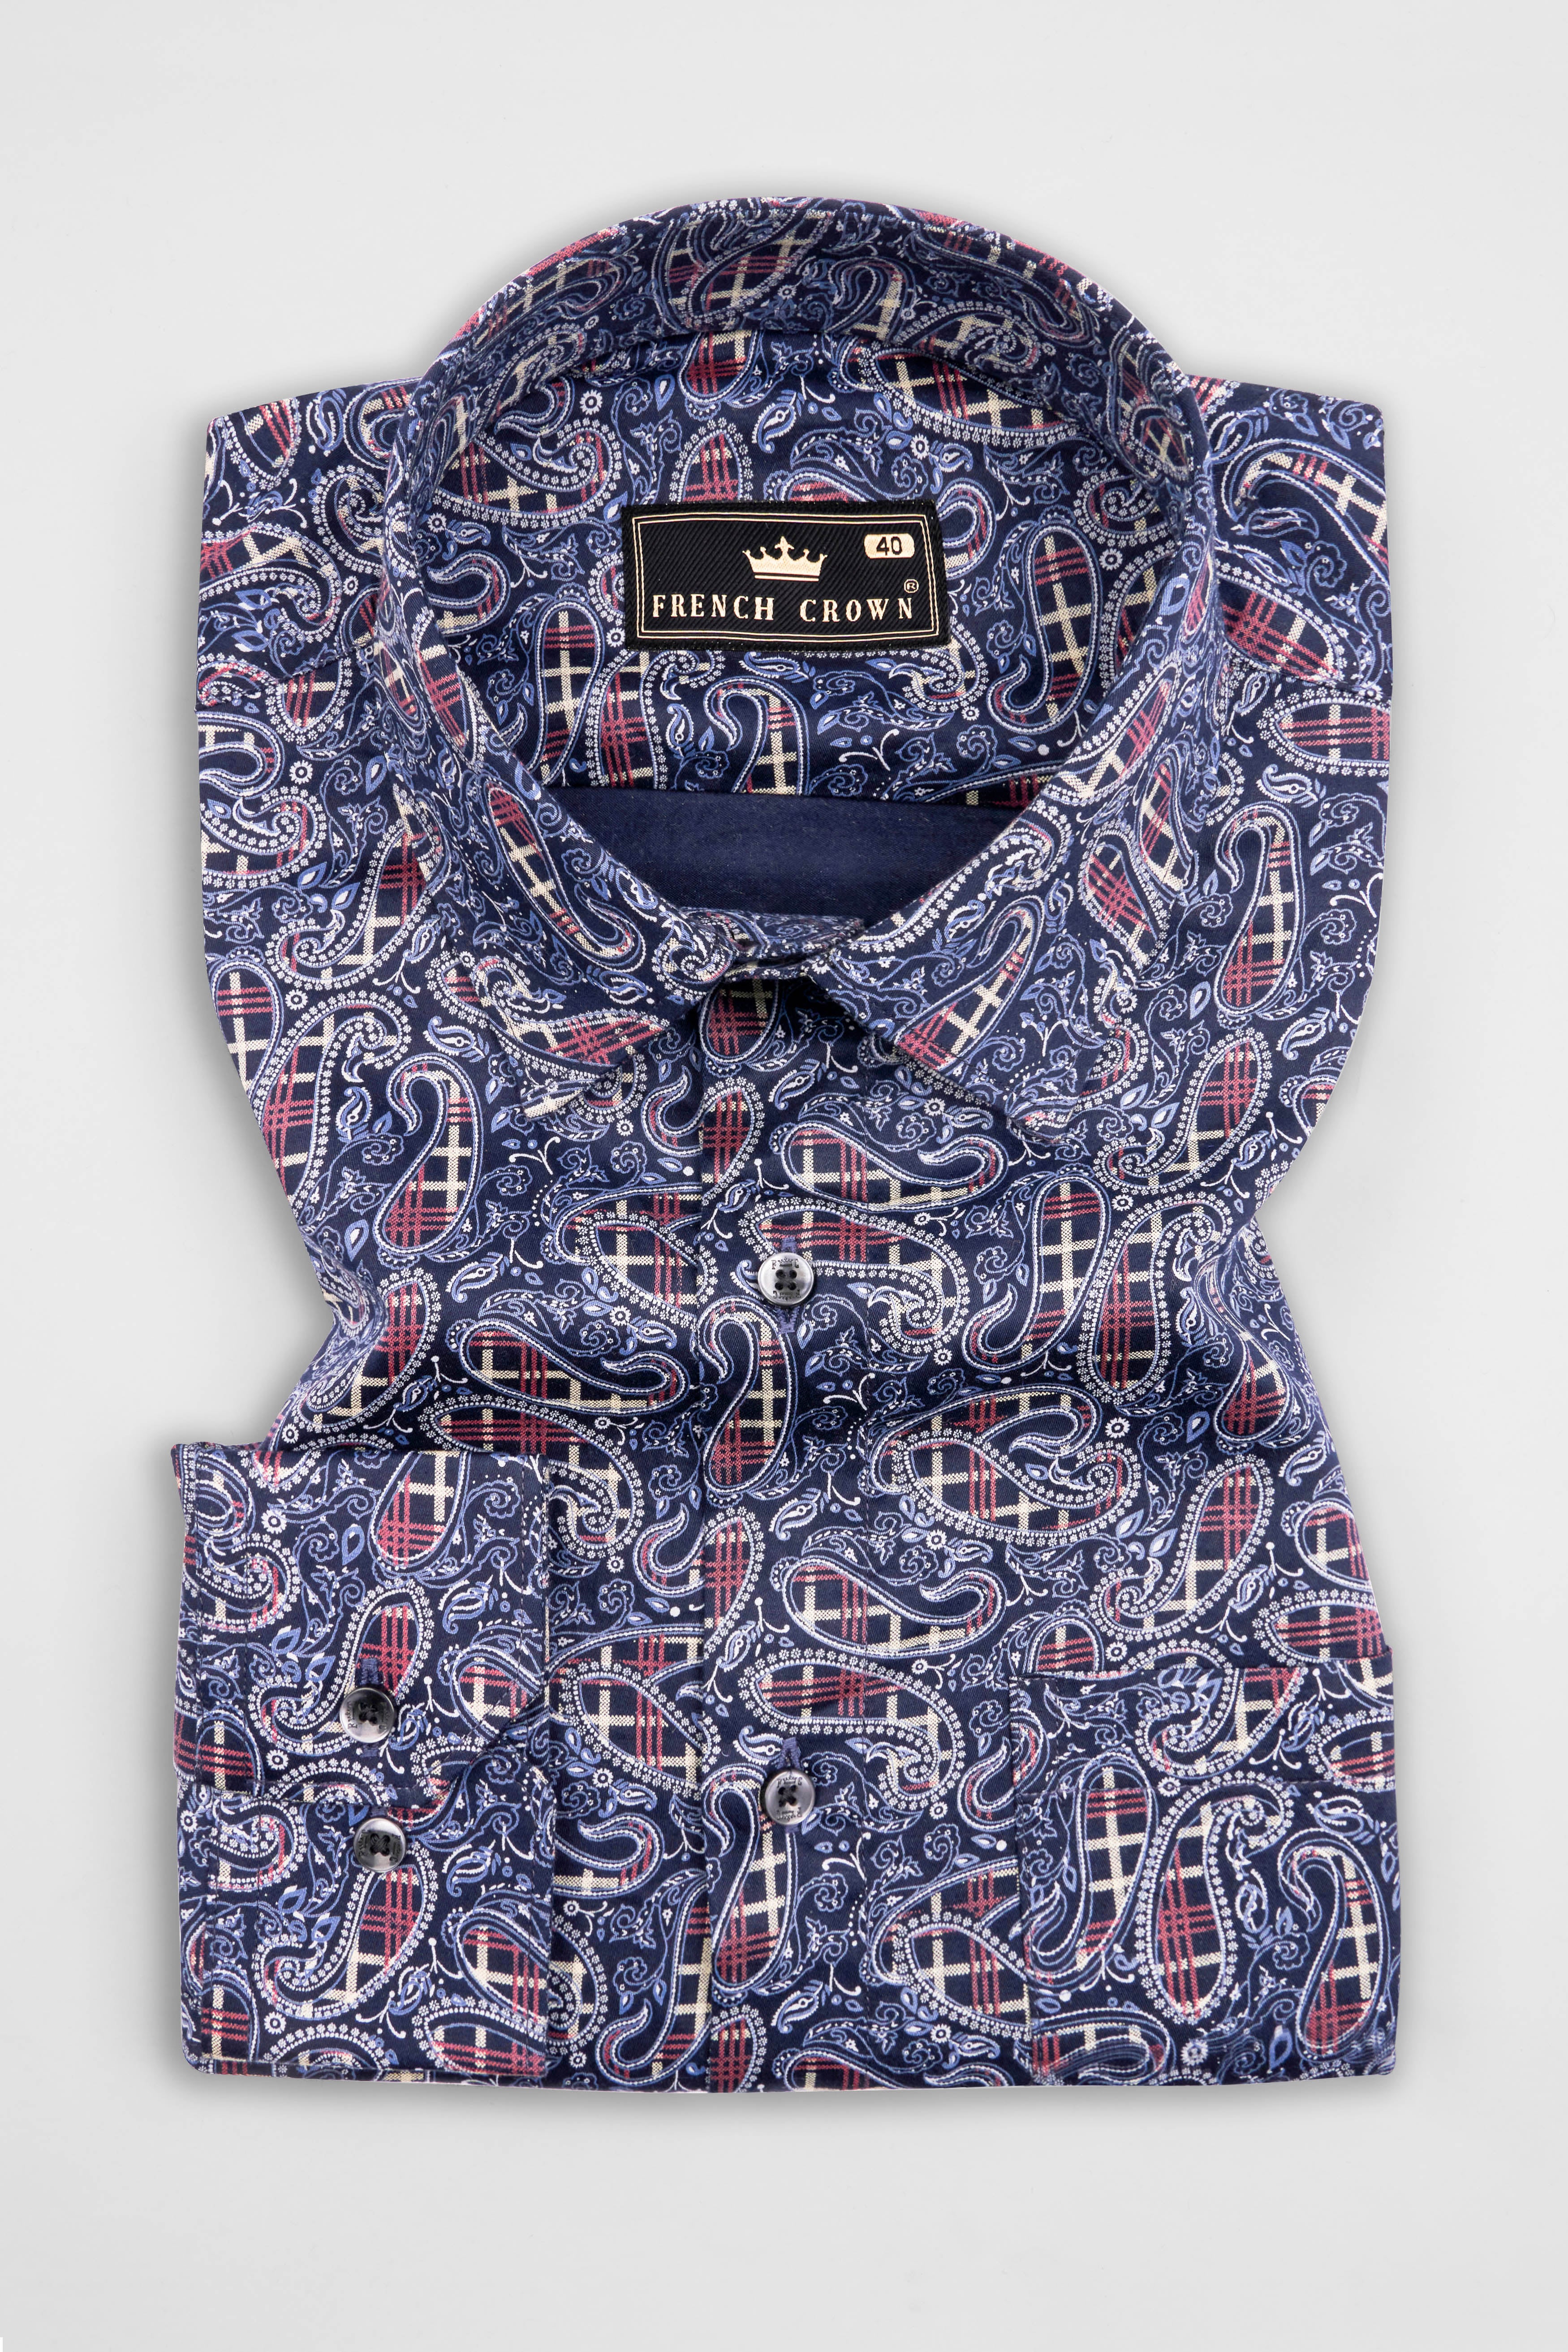 Firefly Blue with Multicolour Paisley Printed Super Soft Premium Cotton Shirt